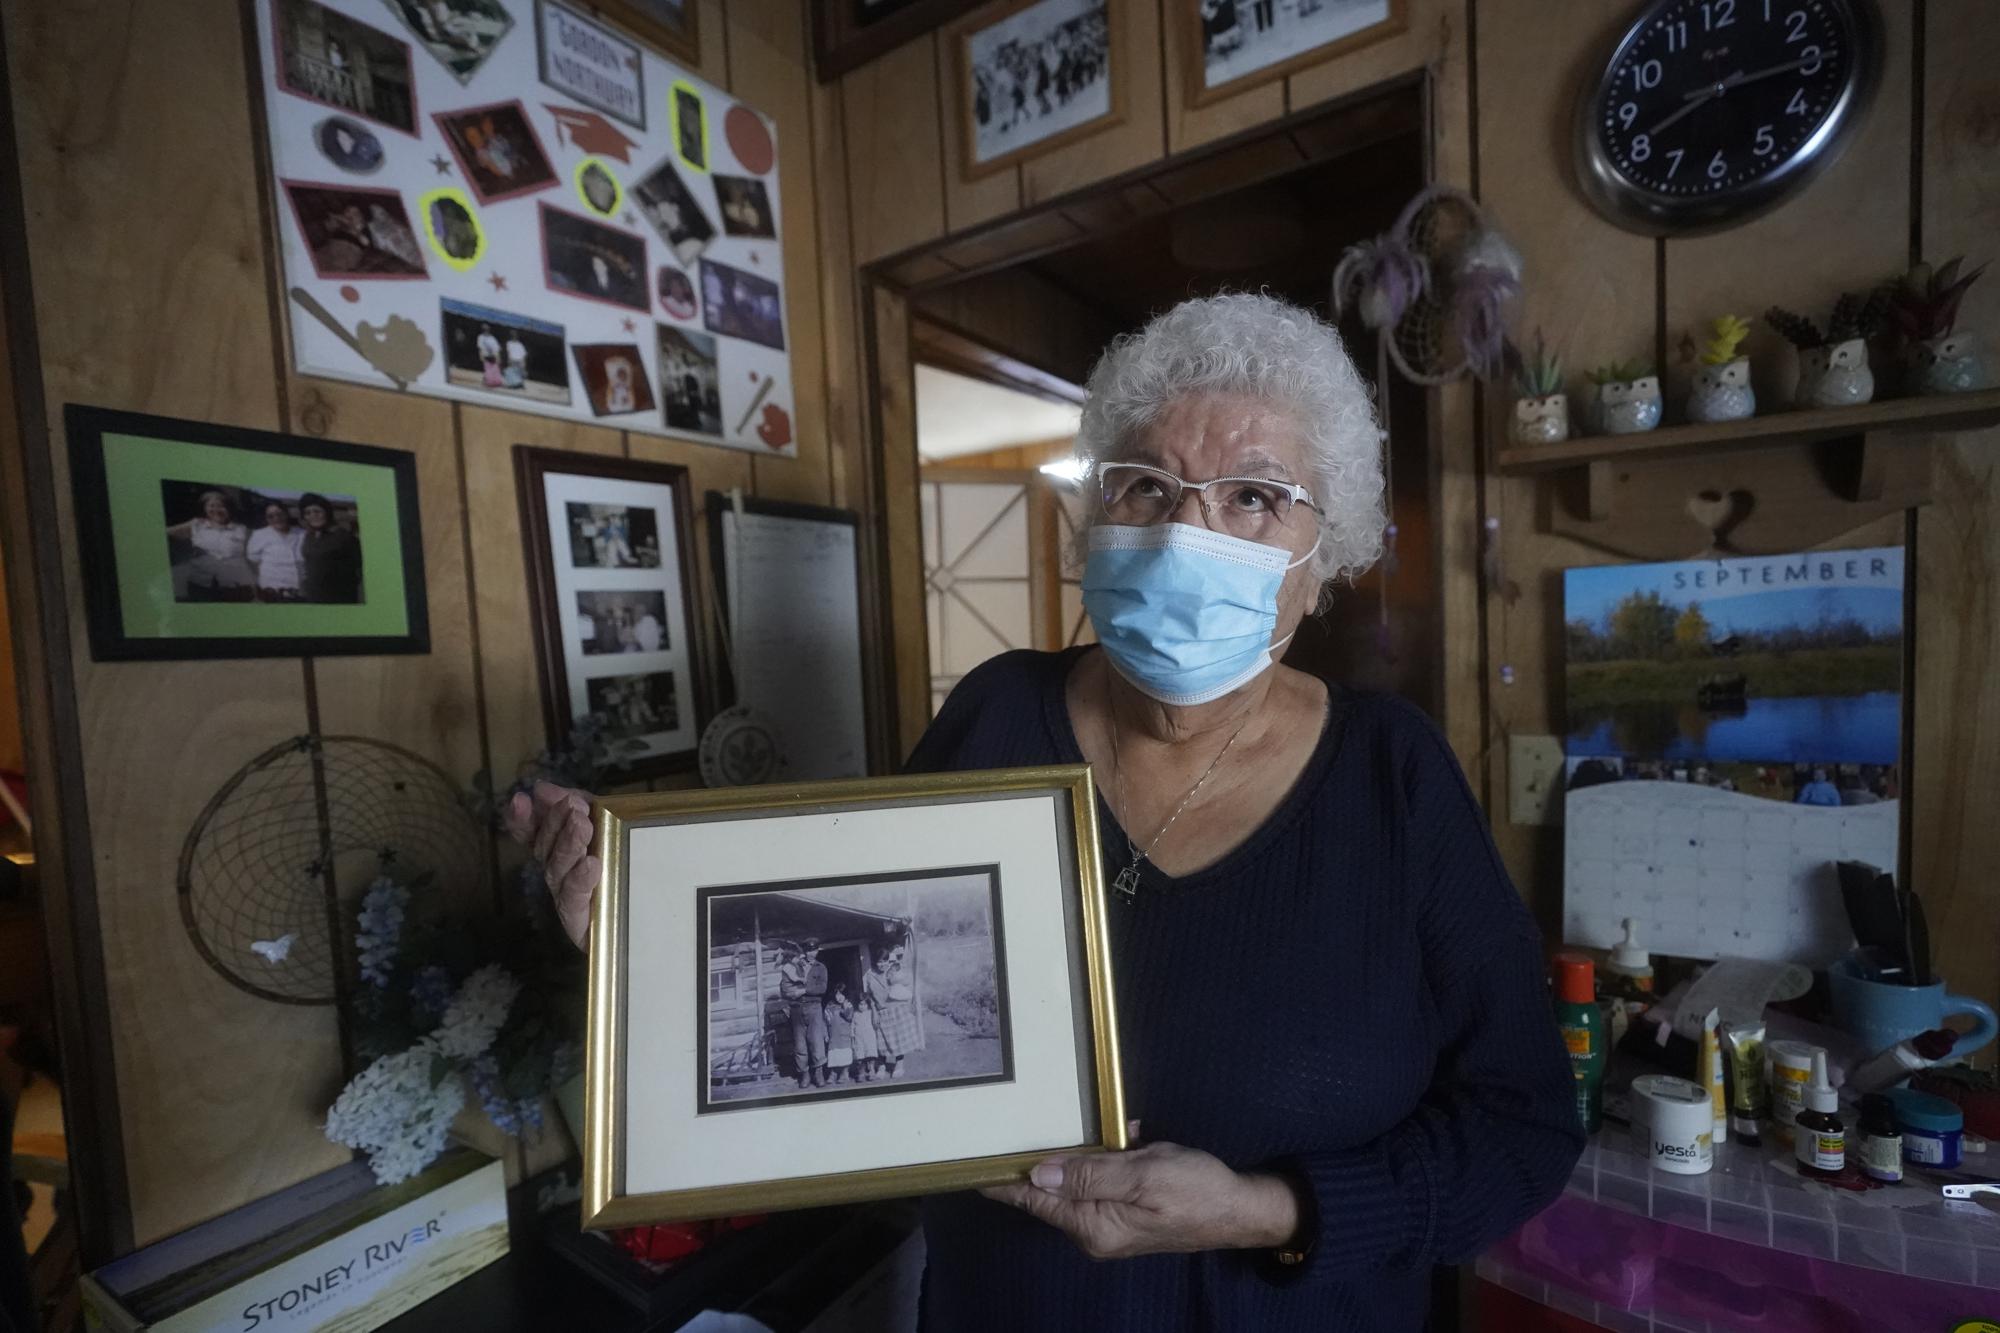 Daisy Northway holds an undated photograph of her parents at her home Wednesday, Sept. 22, 2021, in Tok, Alaska. Northway speaks from first-hand knowledge when advocating that people get vaccinated for COVID-19. Her family came from Healy Lake, located about 70 miles northwest of Tok. The small village's population was almost entirely wiped out by a smallpox epidemic in 1947. "My mother and dad had to bury my mother's parents and three of their children in a mass grave because they were so tired," she said. (AP Photo/Rick Bowmer)